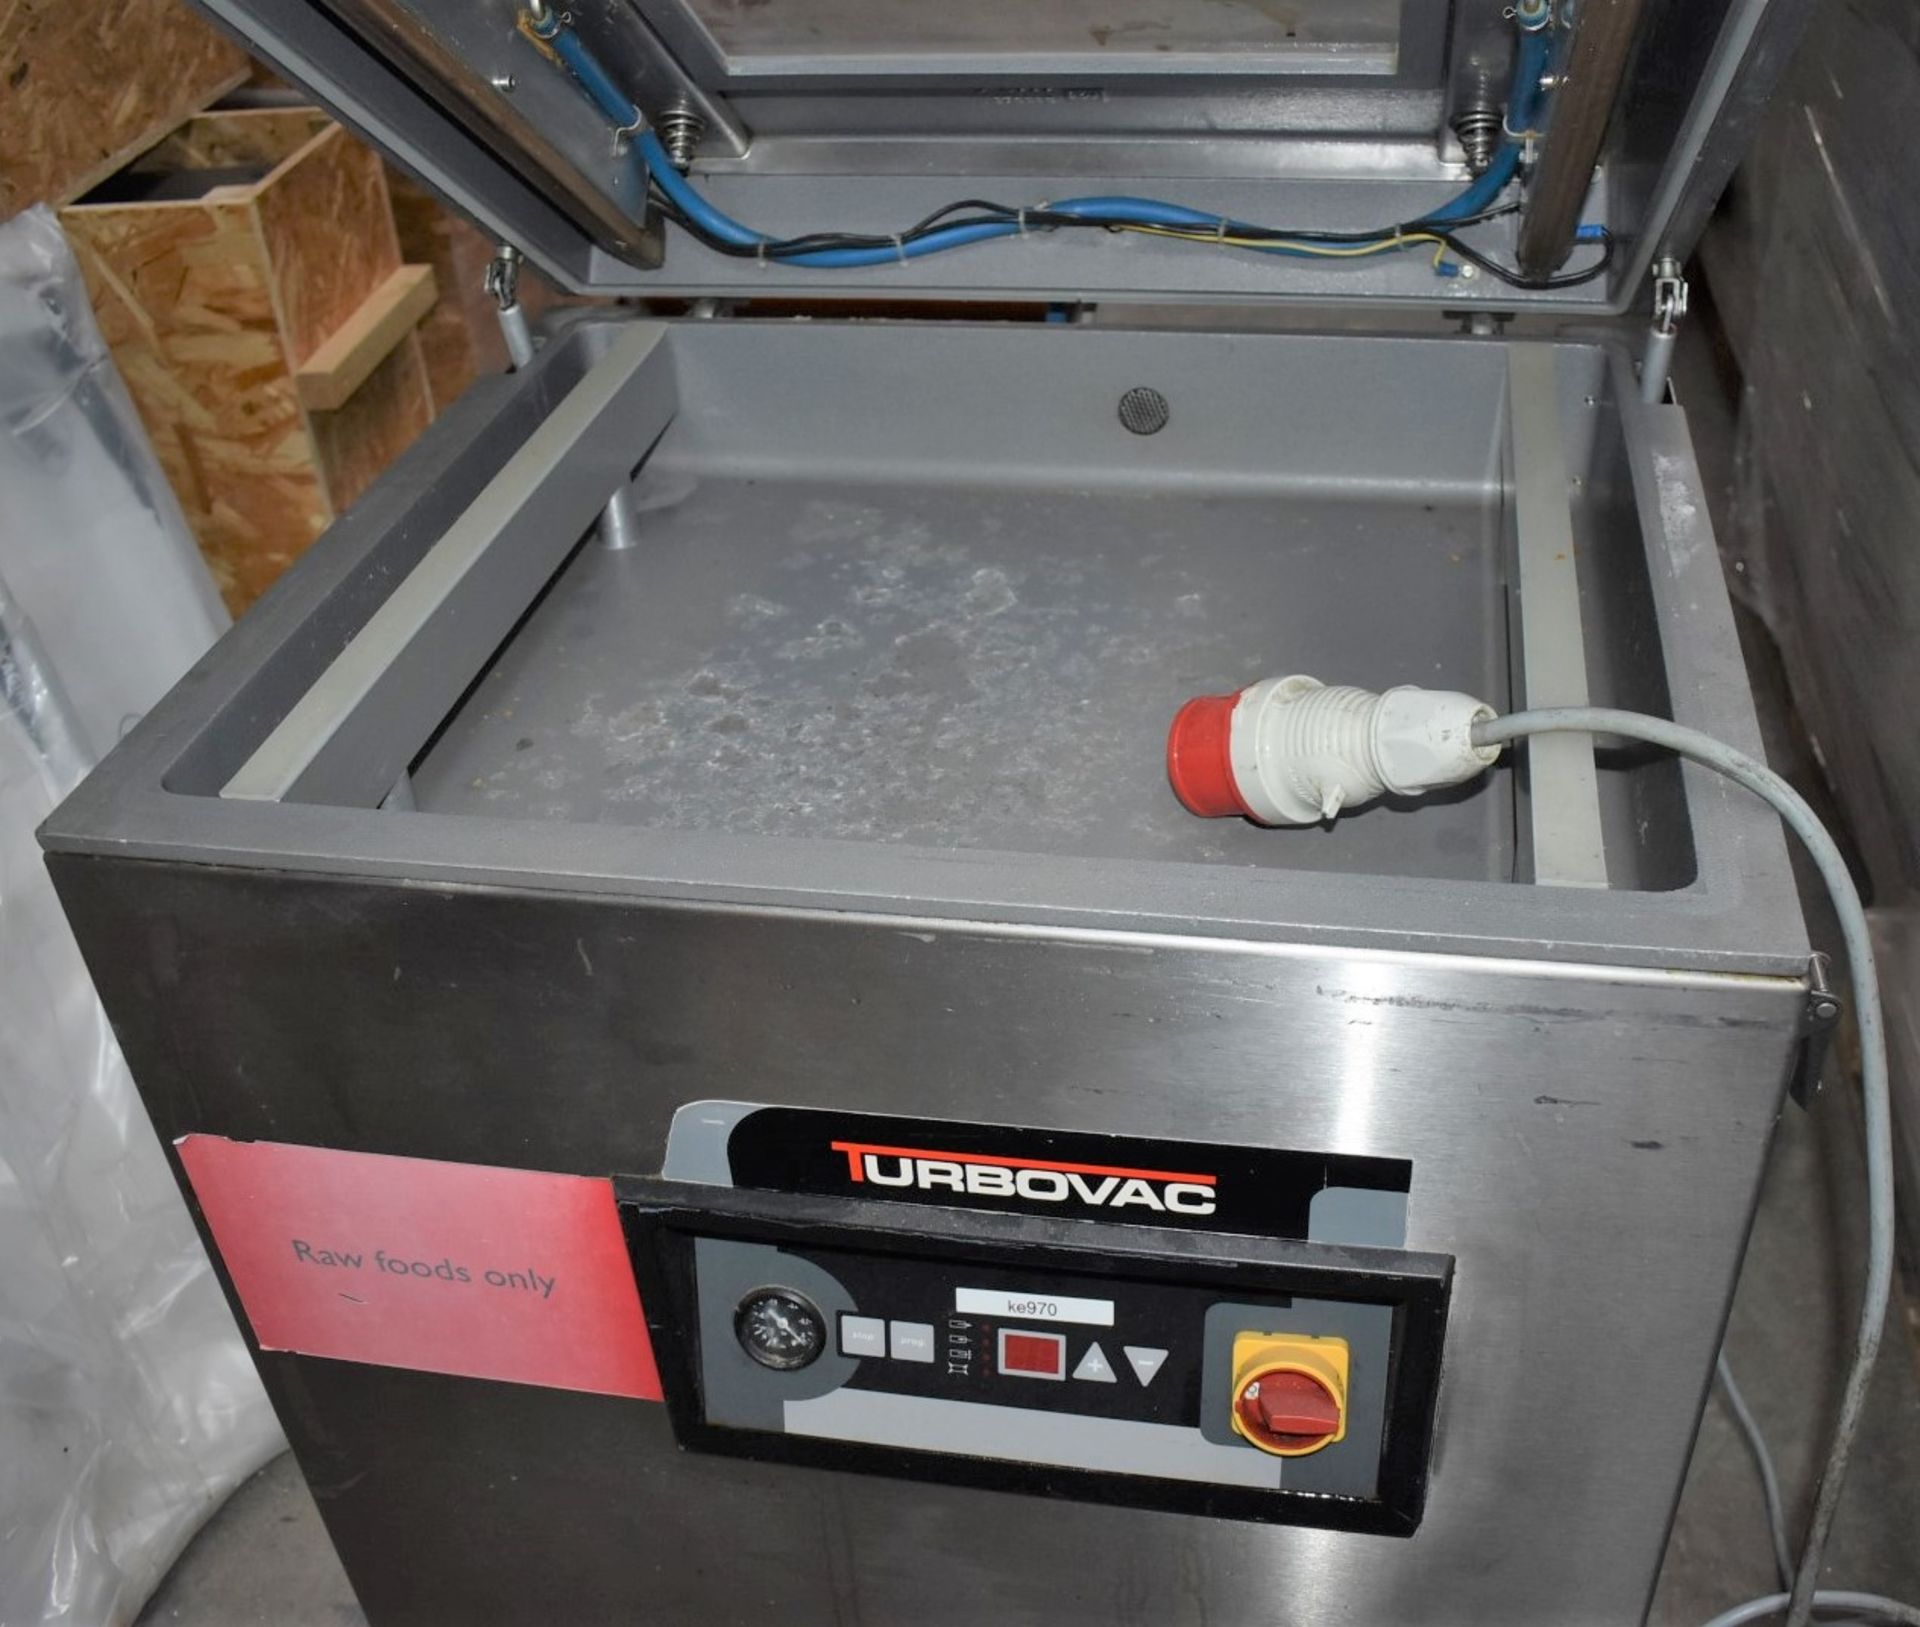 1 x Turbovac Vacuum Packer - Model SB520 - 3 Phase - Recently Removed From a Restaurant - Image 3 of 4